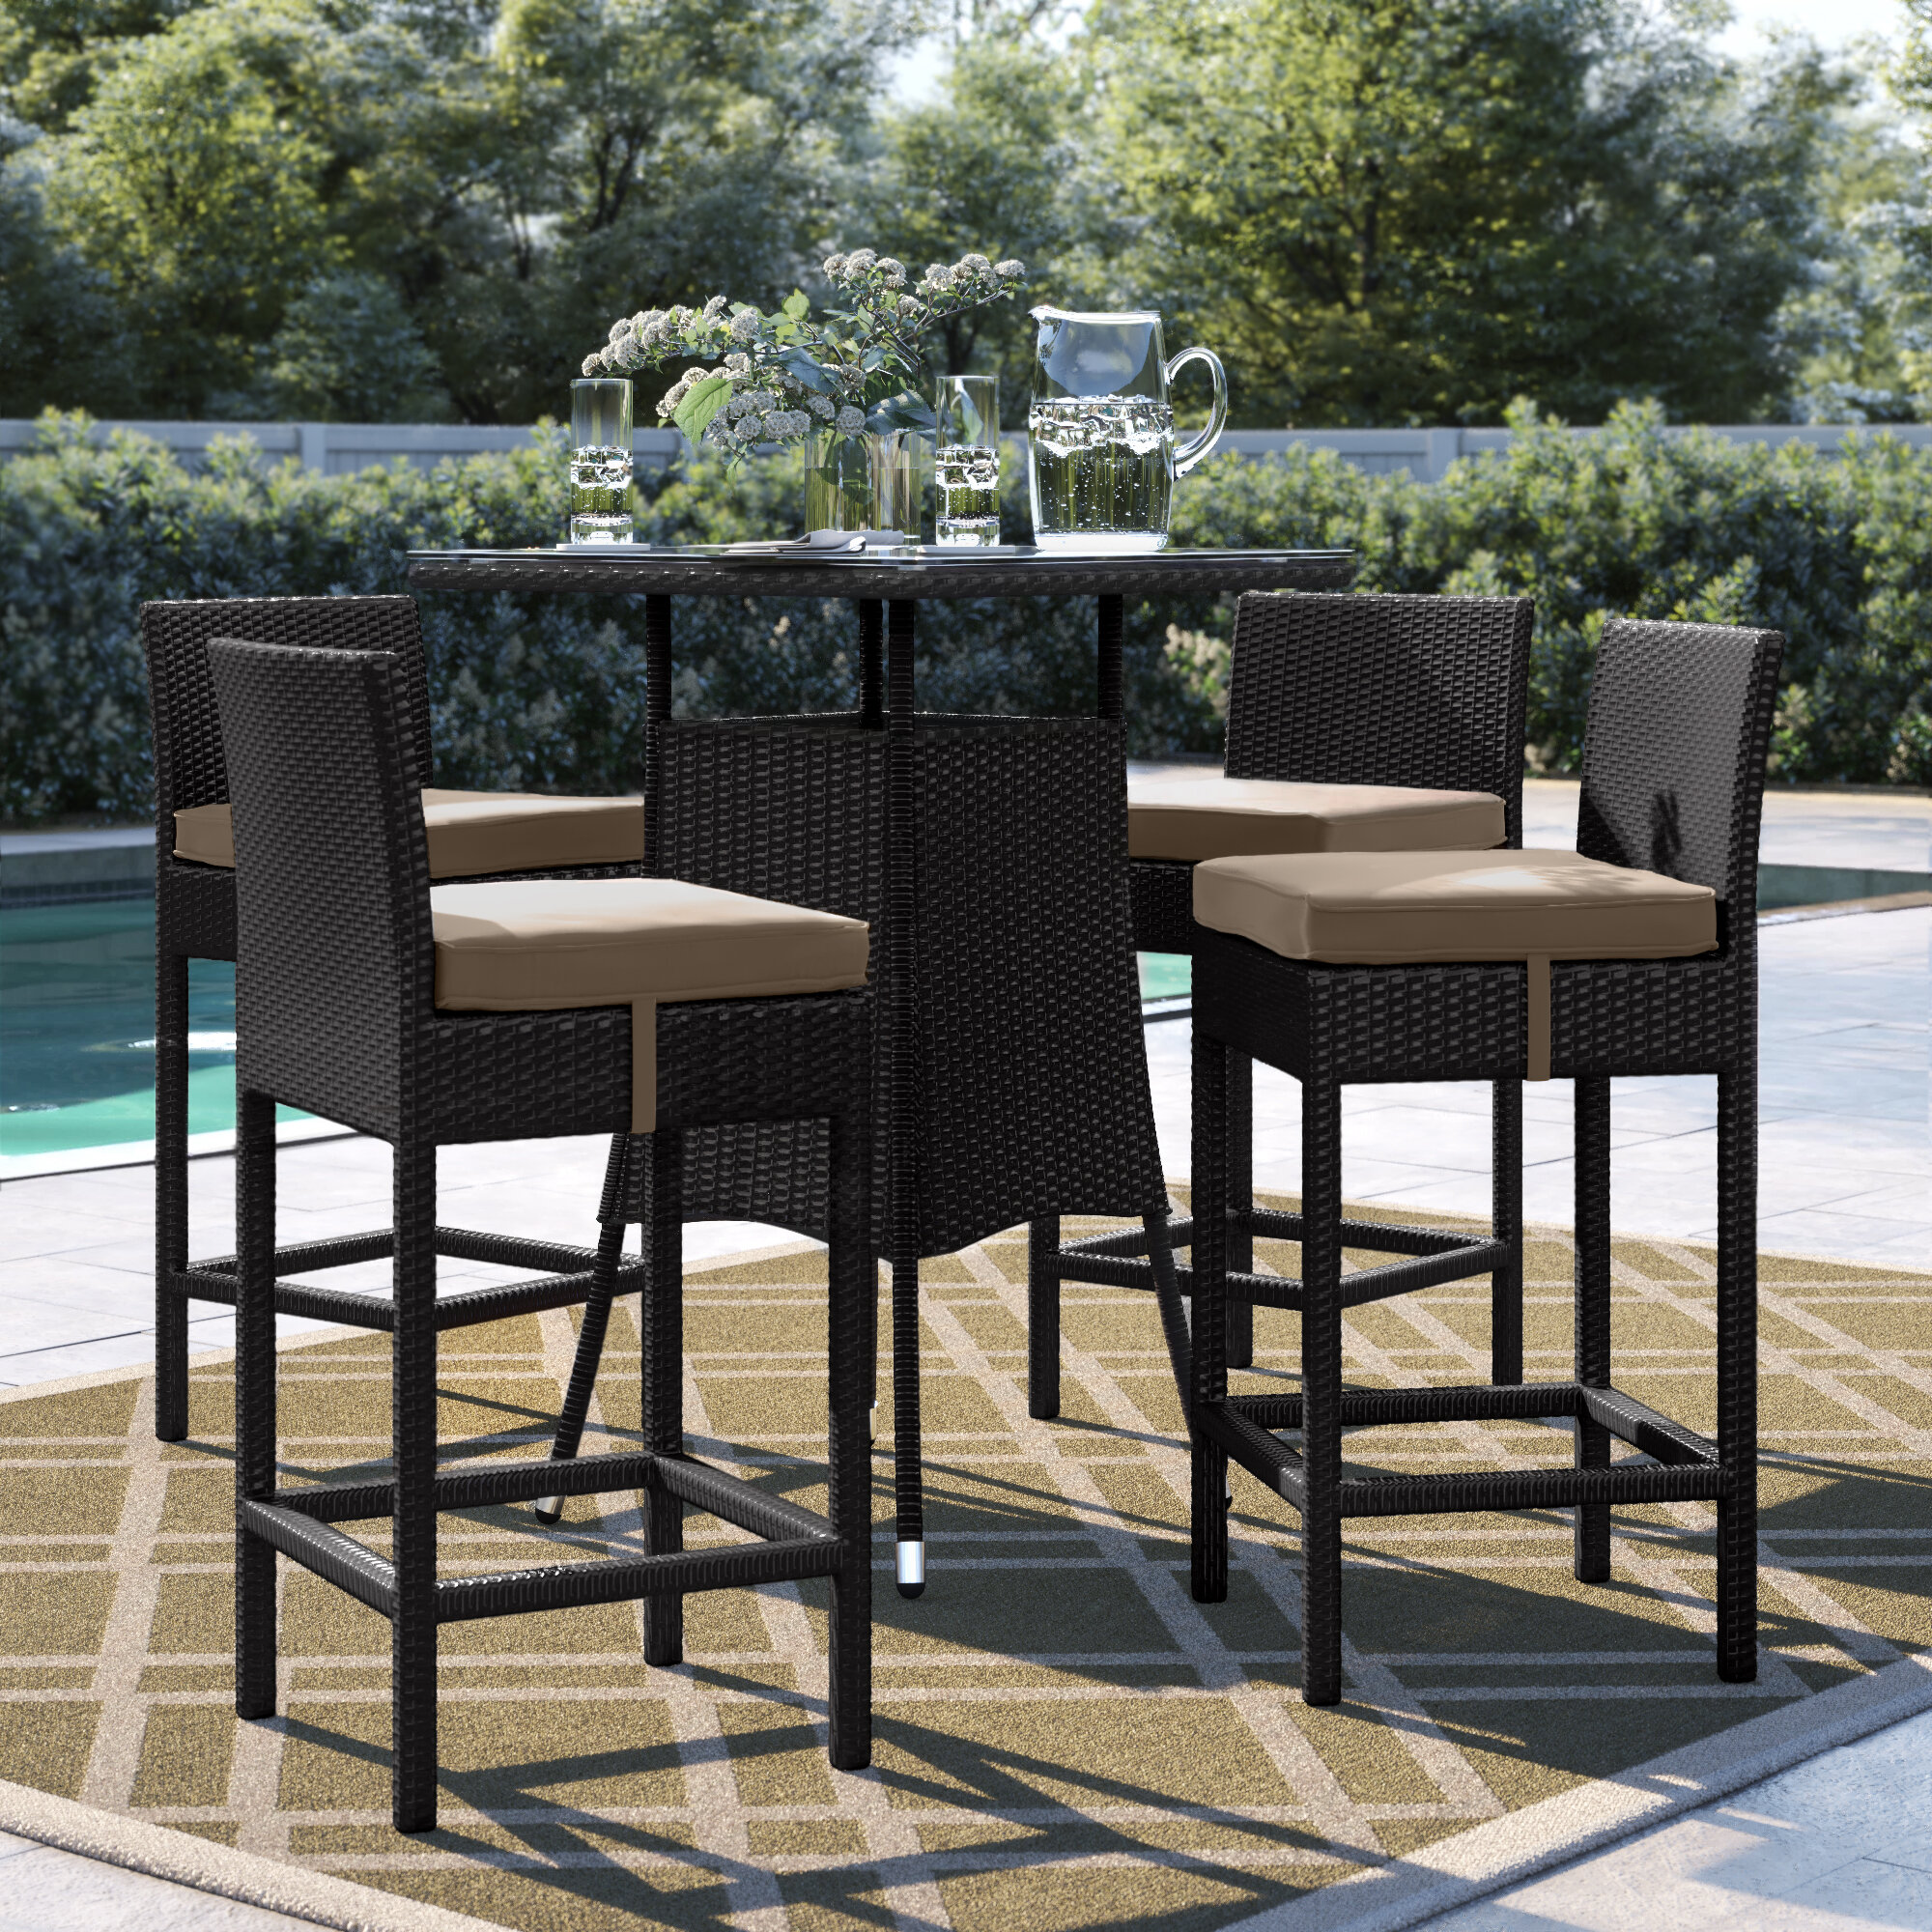 Brentwood Square 4 Person 315 Long Bar Height Dining Set With Cushions 